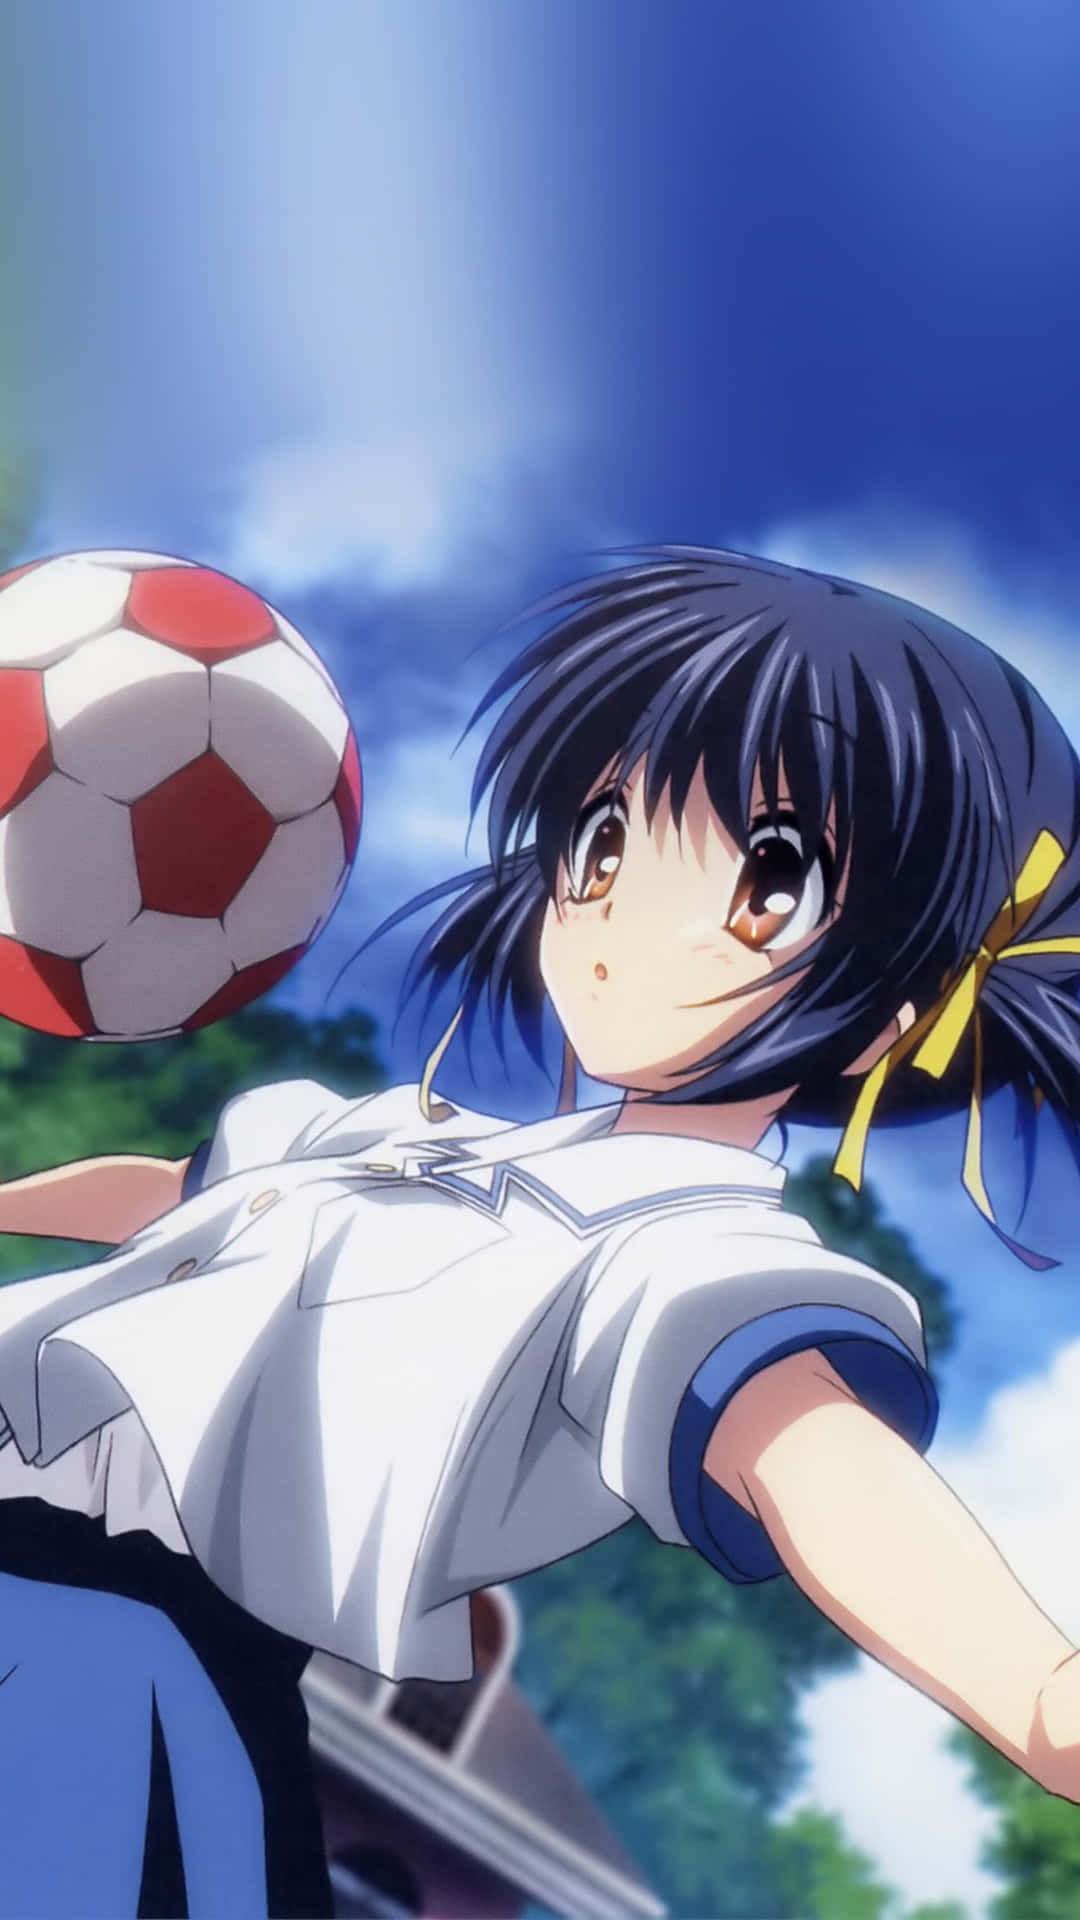 A Young Soccer Player Kicking The Ball Into The Goal Background